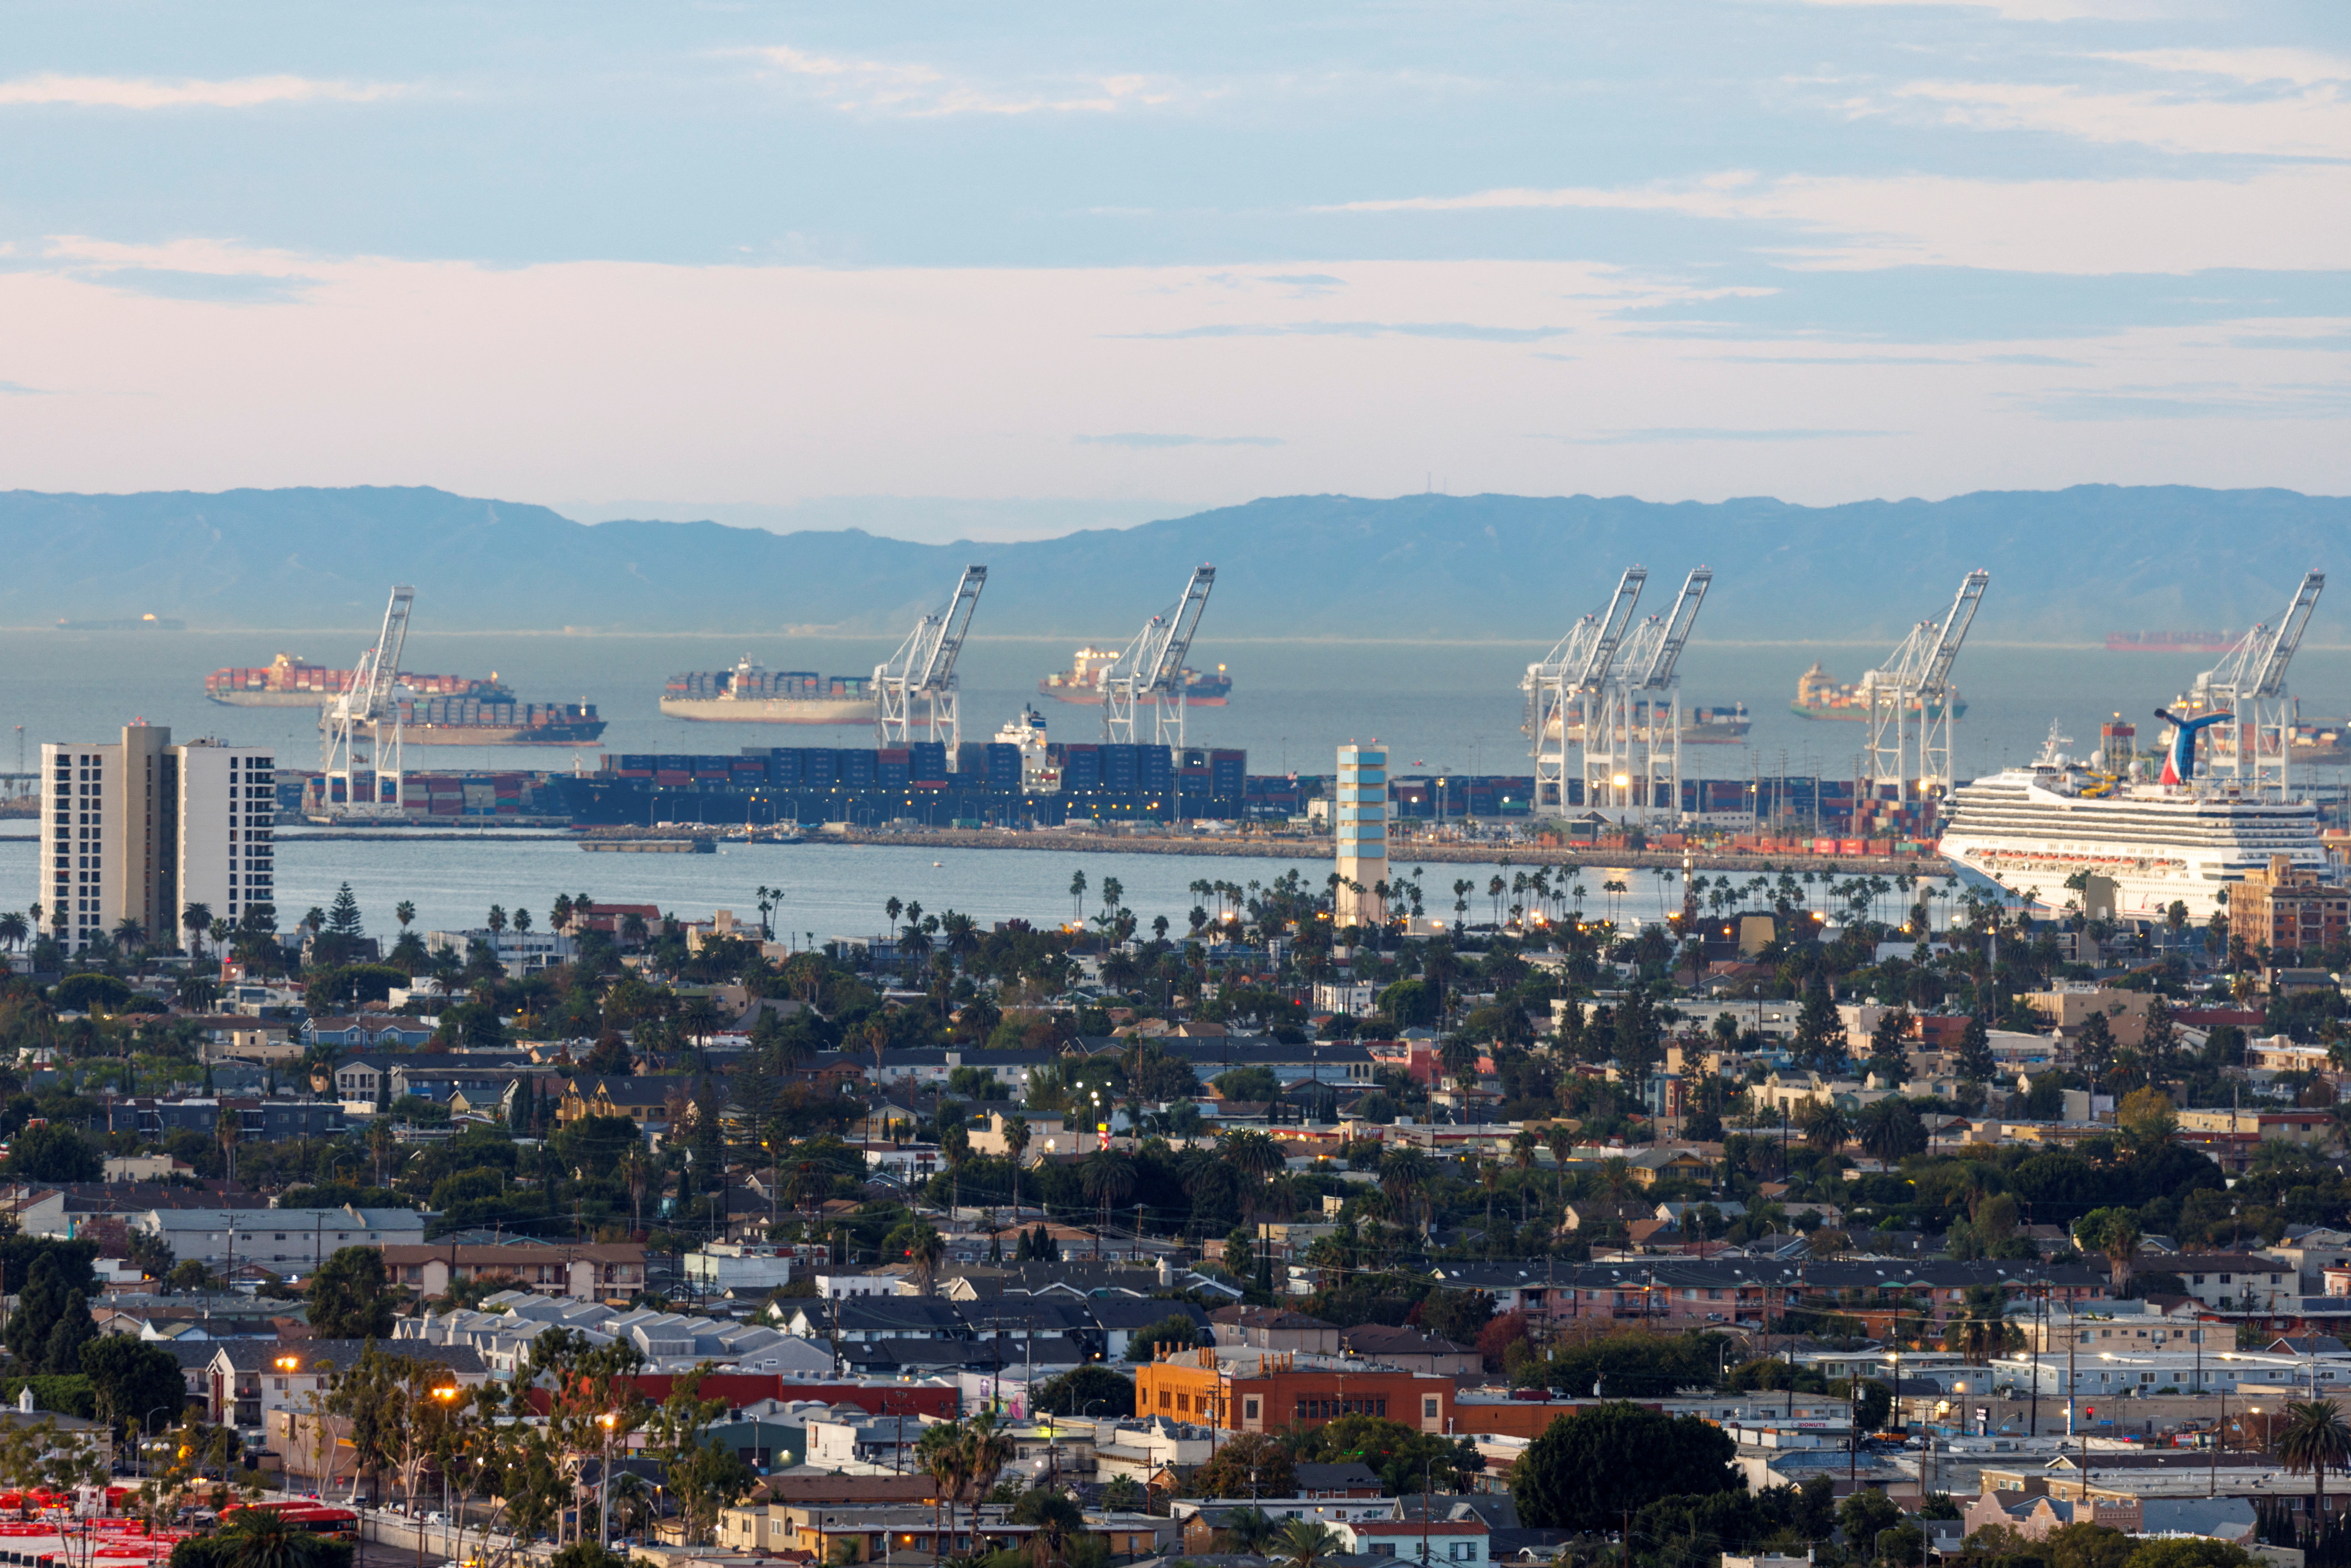 Ships are shown offshore at the port of Long Beach, California